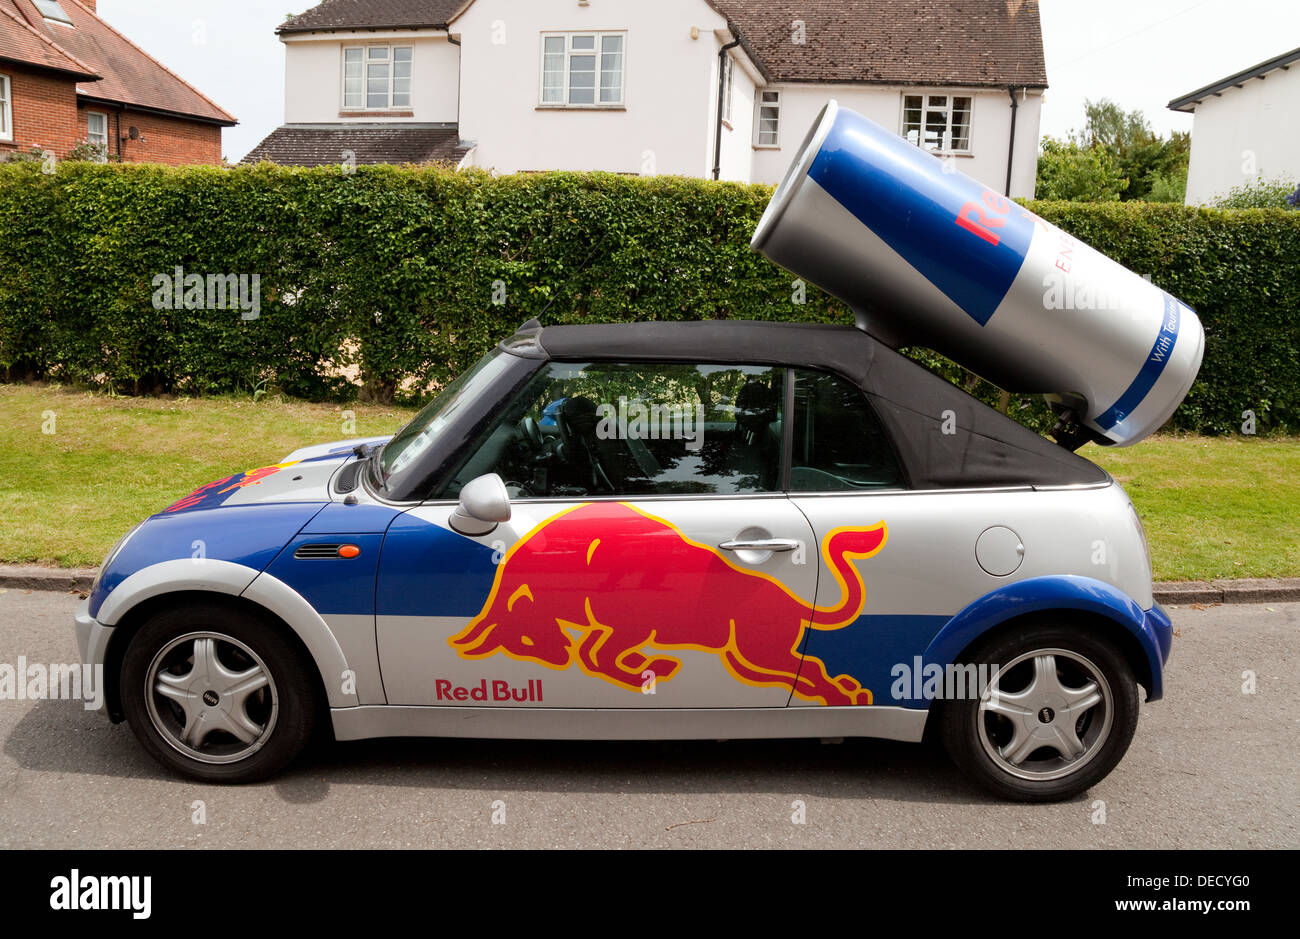 Red bull car stock photography and images - Alamy